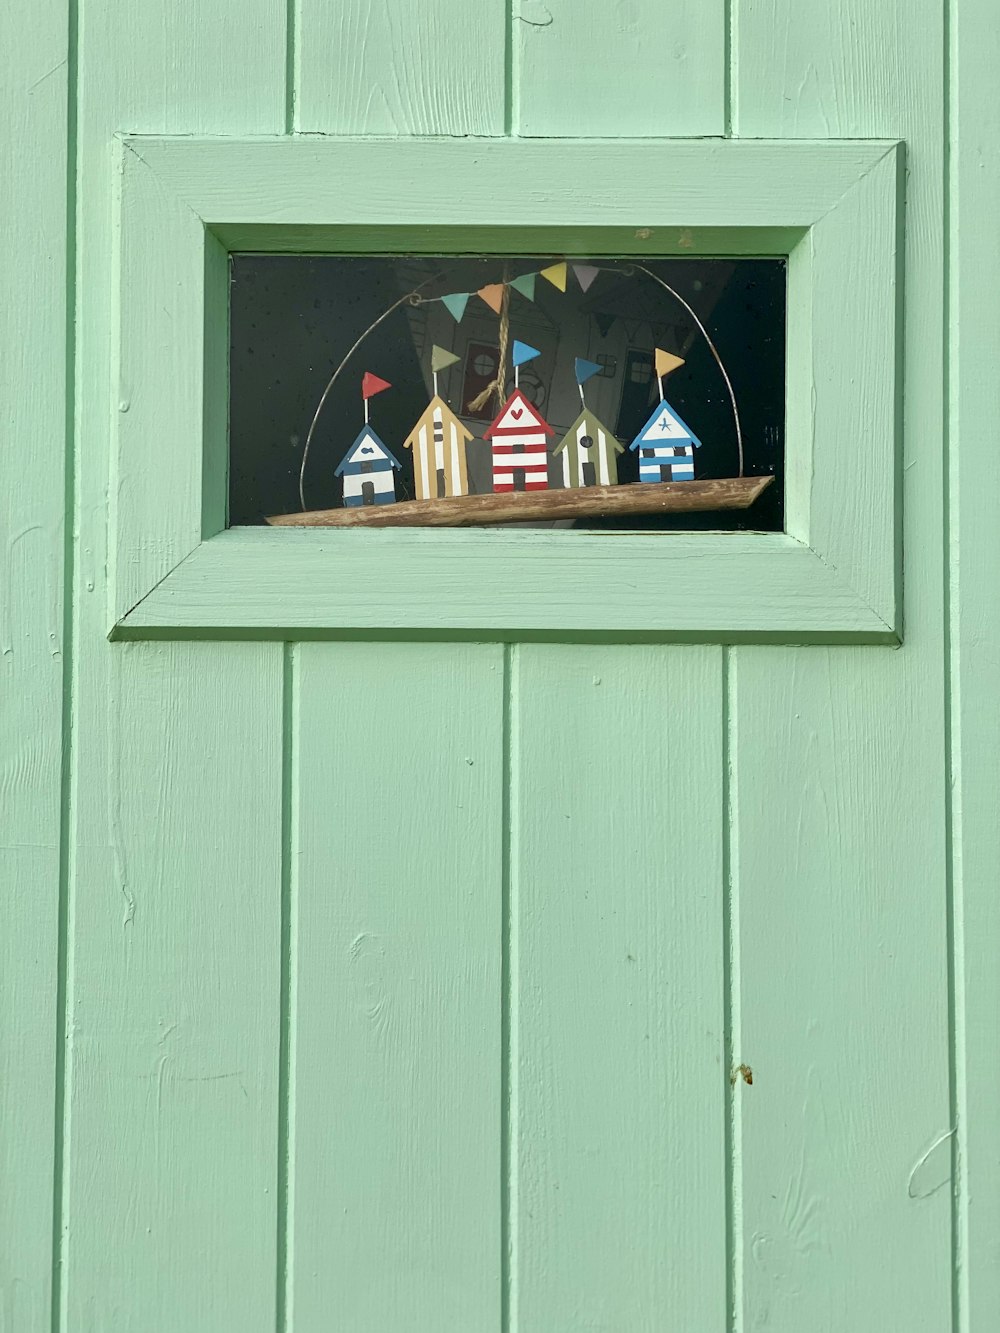 a picture of some houses in a window